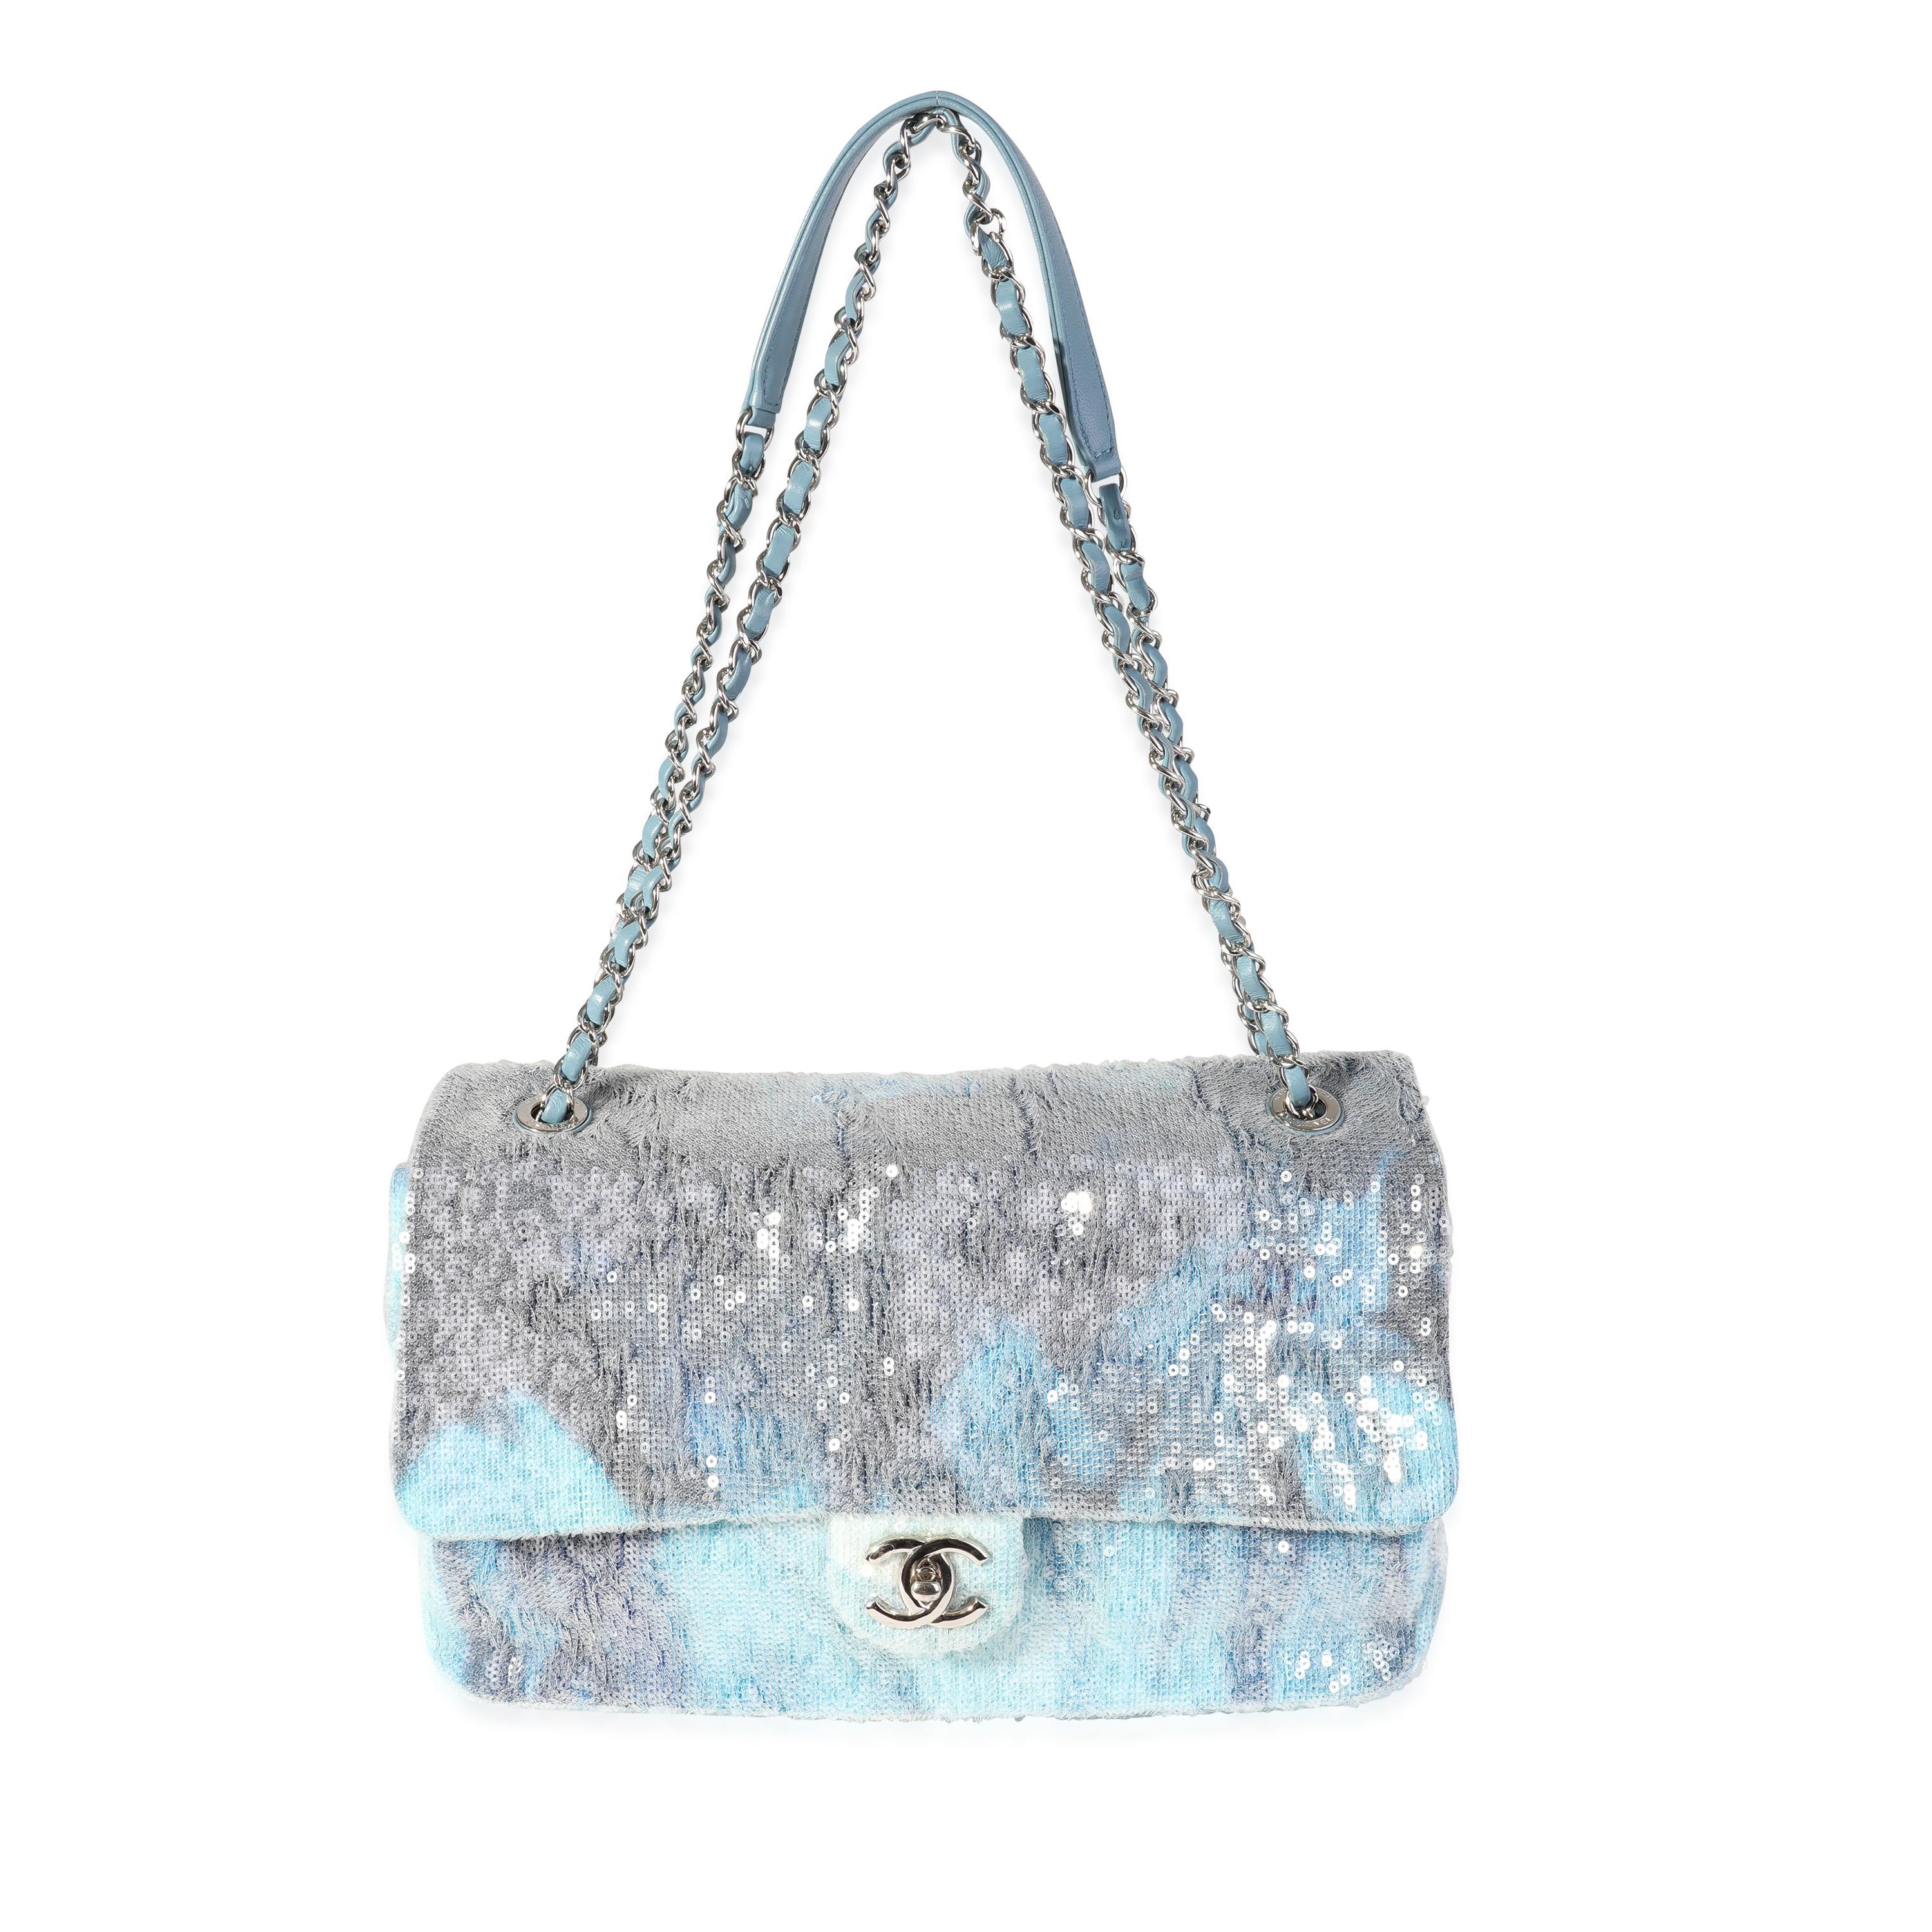 Listing Title: Chanel Blue Sequin Large Waterfall Single Flap Bag
SKU: 120458
Condition: Pre-owned (3000)
Handbag Condition: Very Good
Condition Comments: Very Good Condition. Shape loss due to wear. scratching to hardware. Marks to interior